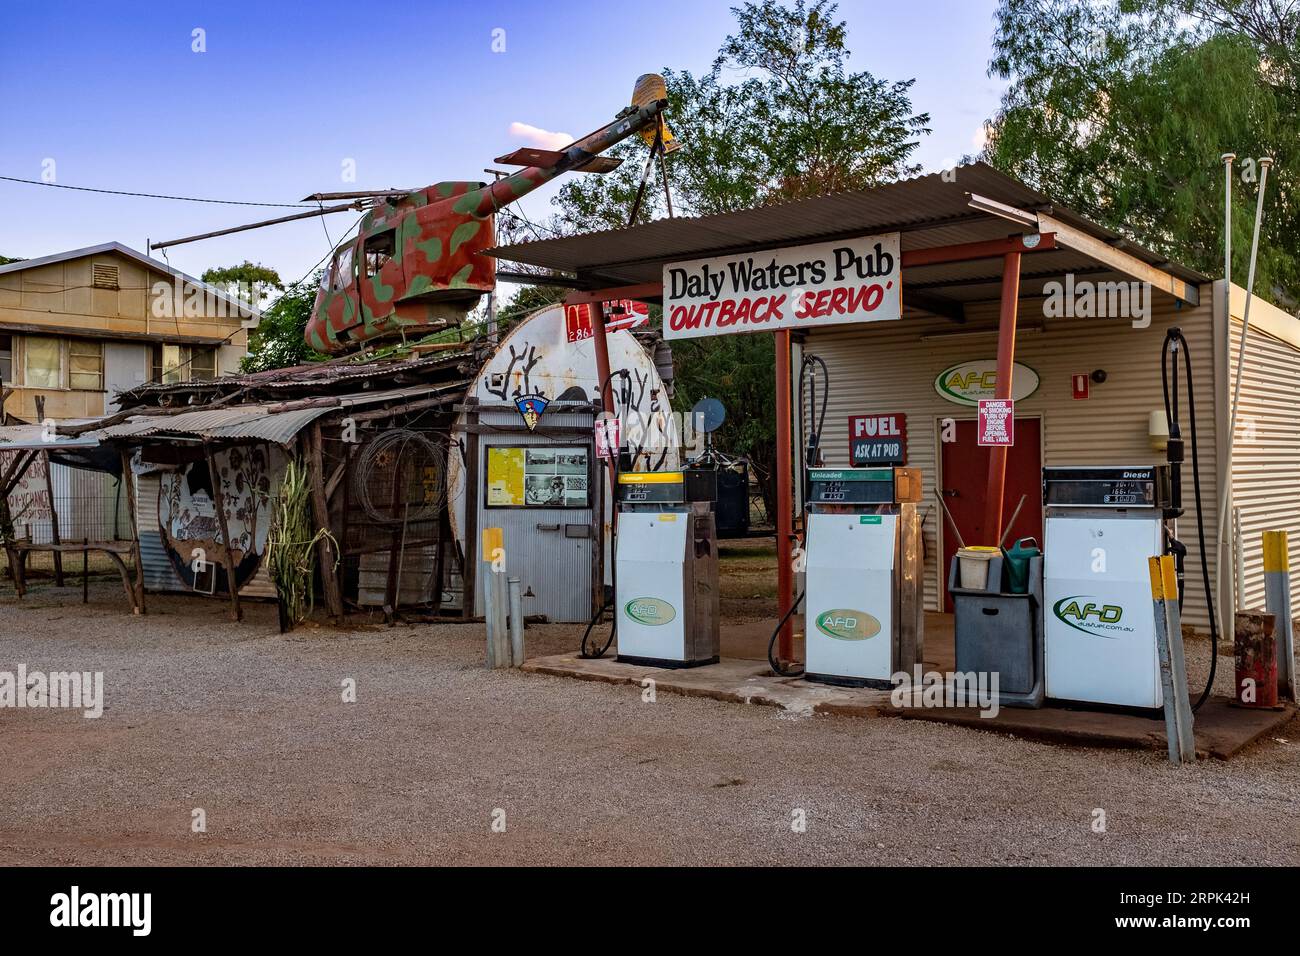 Notable for the helicopter wreck on its roof, The Daly Waters Pub, and service station in Daly Waters an isolated town (pop. 55) 820 kilometres south of Darwin in the Northern Territory. Stock Photo